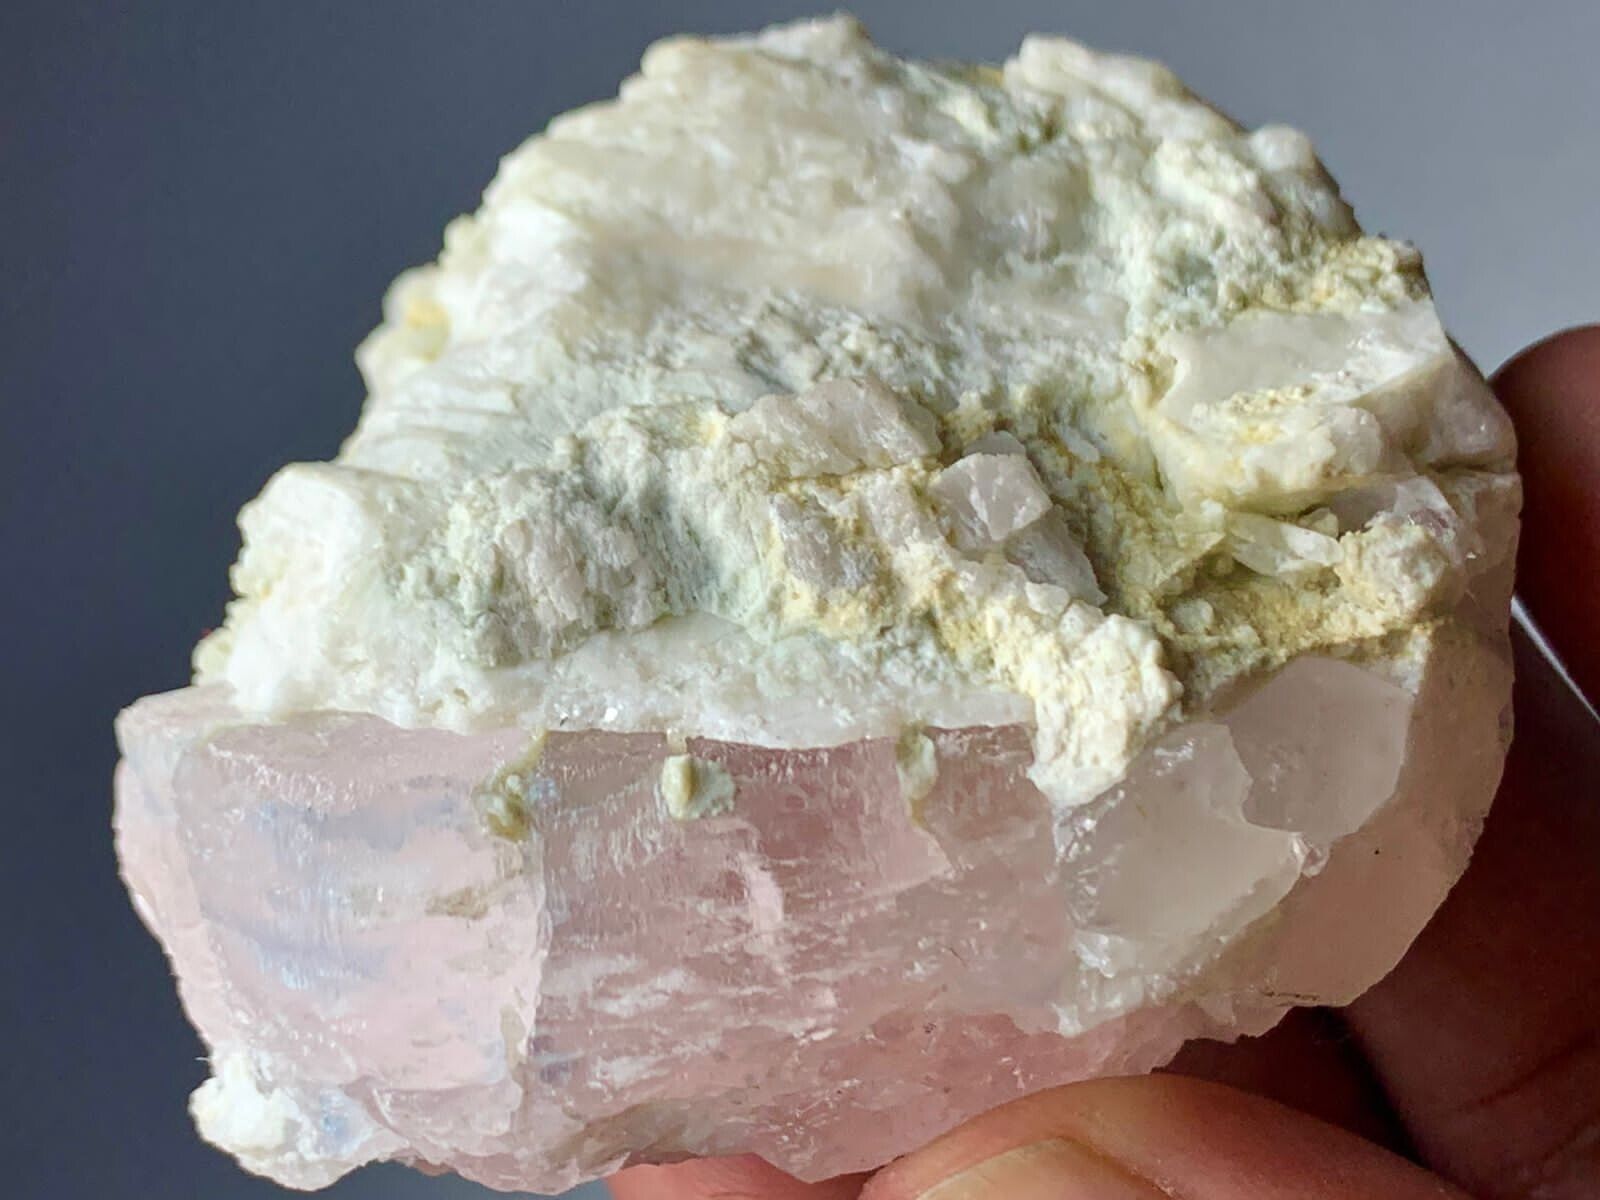 926 Cts Top Quality Terminated Morganite Crystal Specimen from Afghanistan